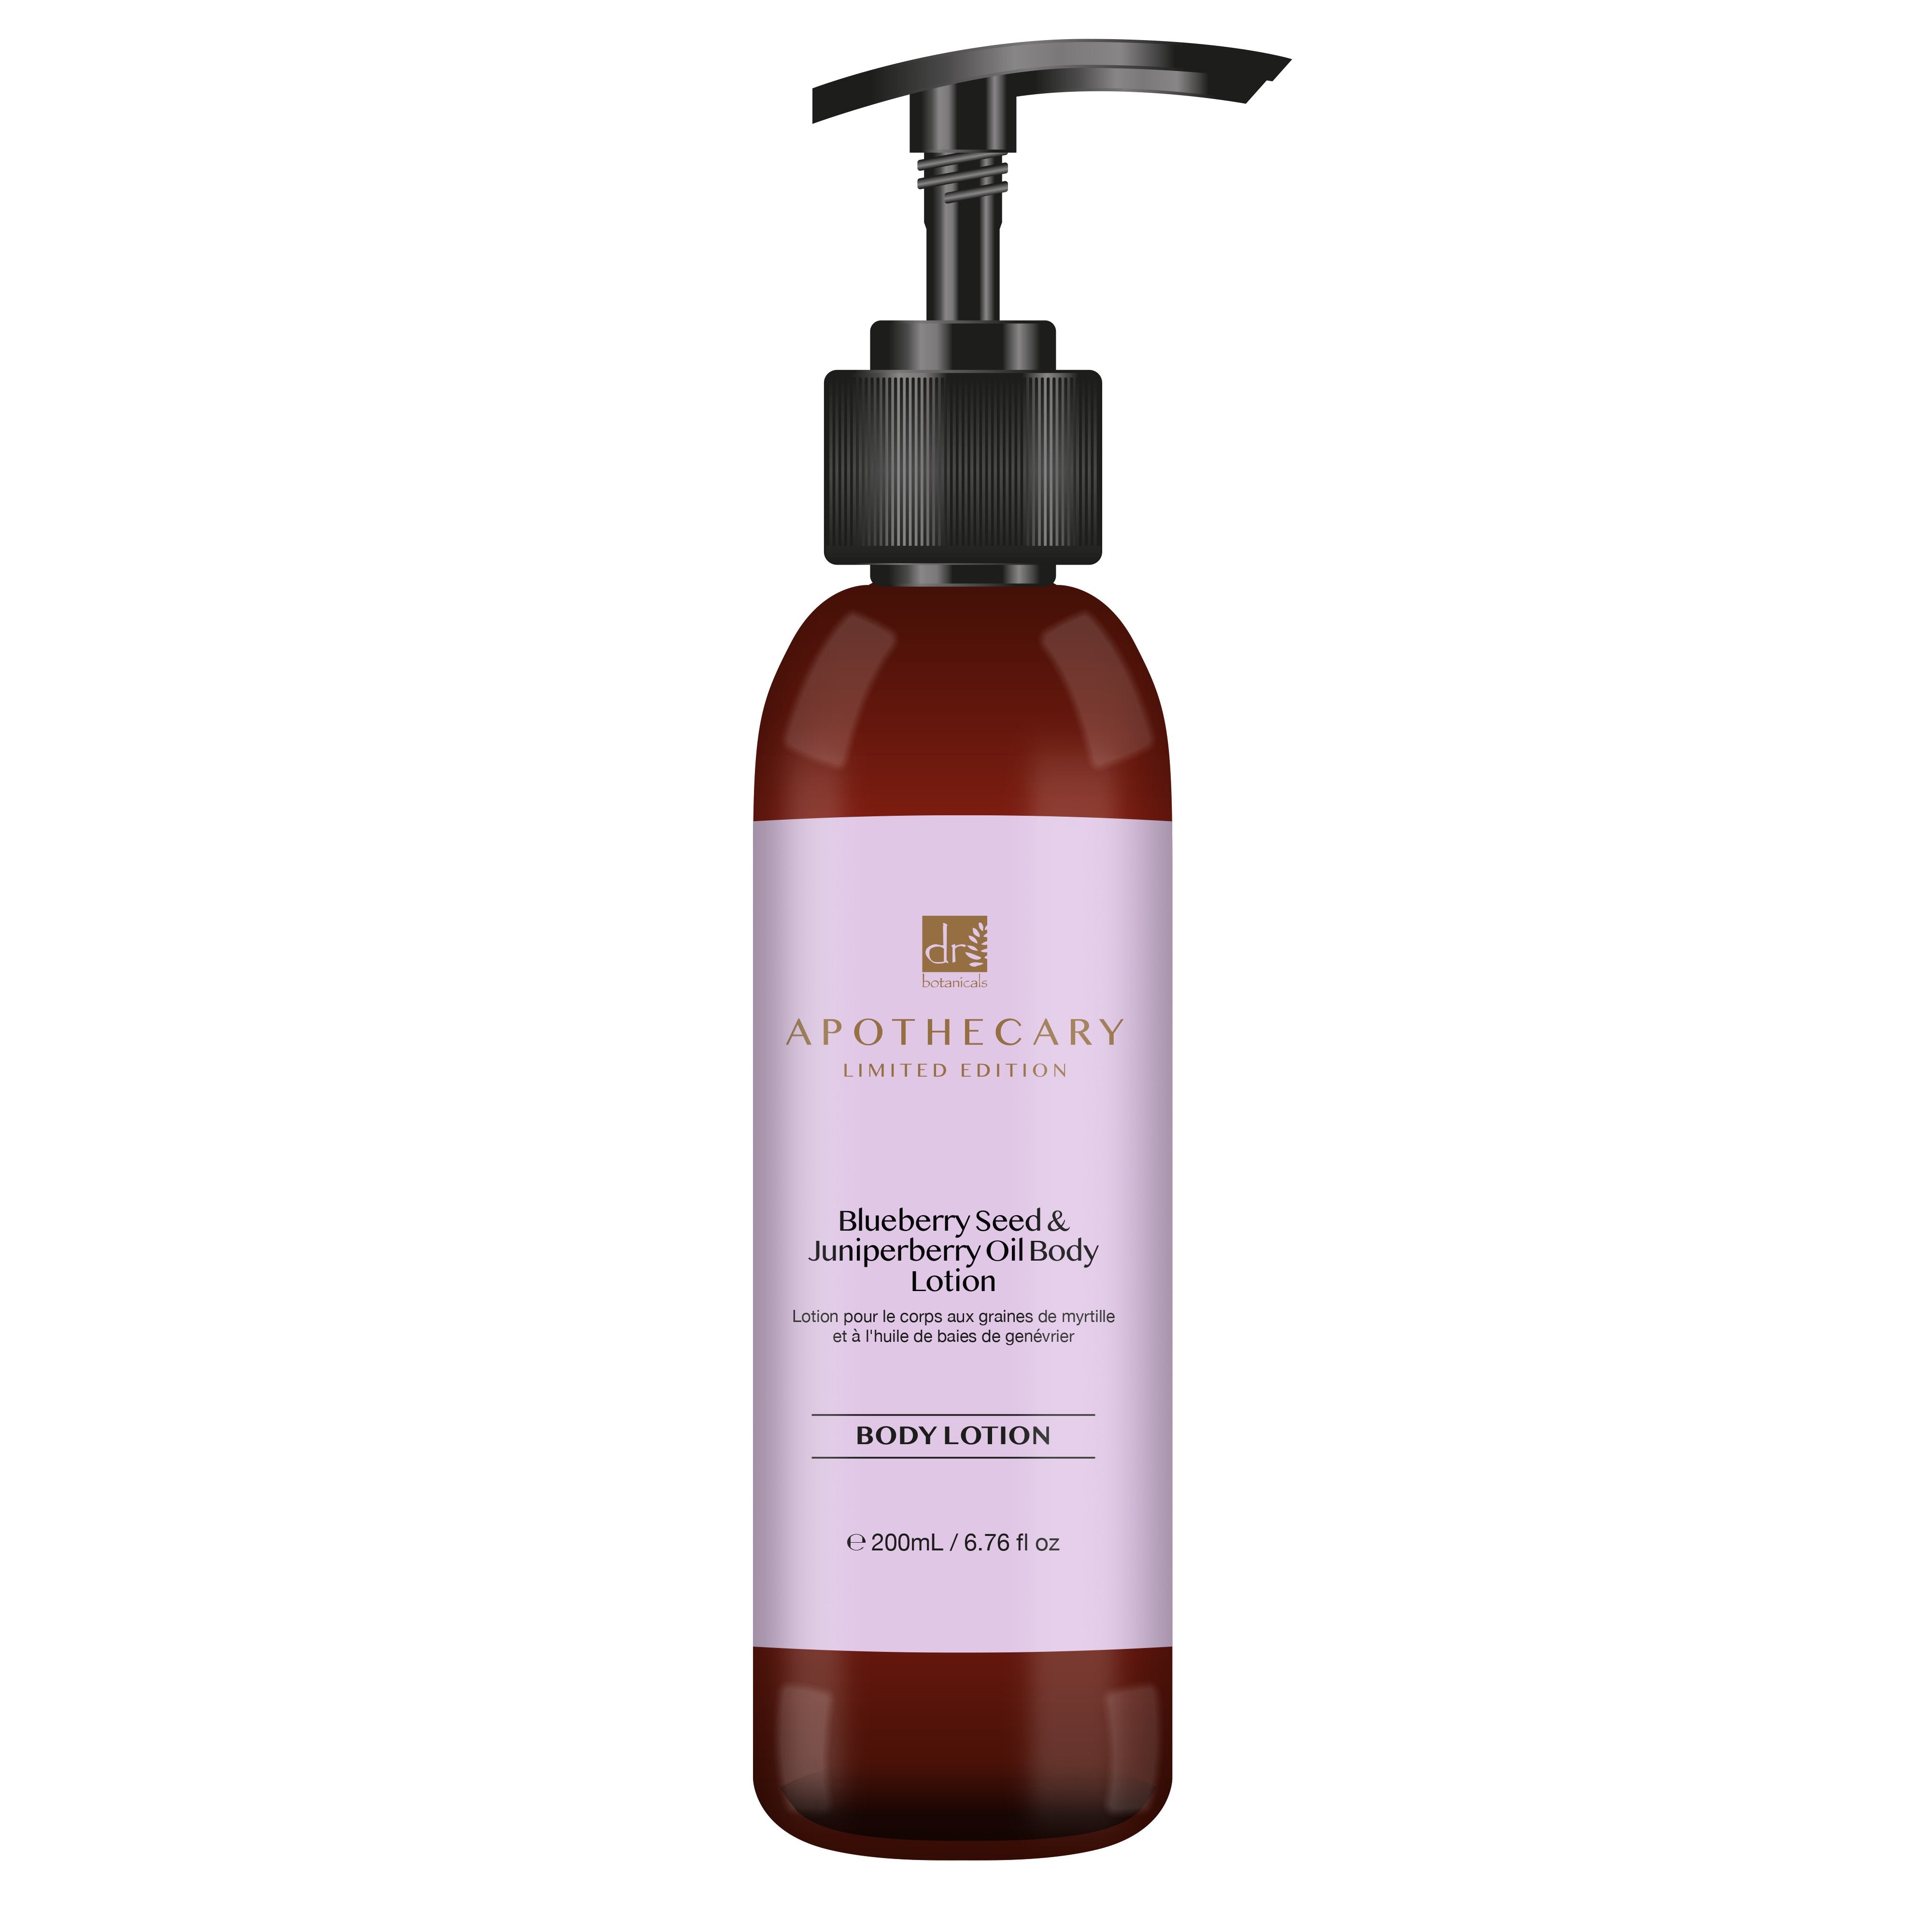 Dr Botanicals Blueberry Seed & Juniperberry Oil Body Lotion 200ml